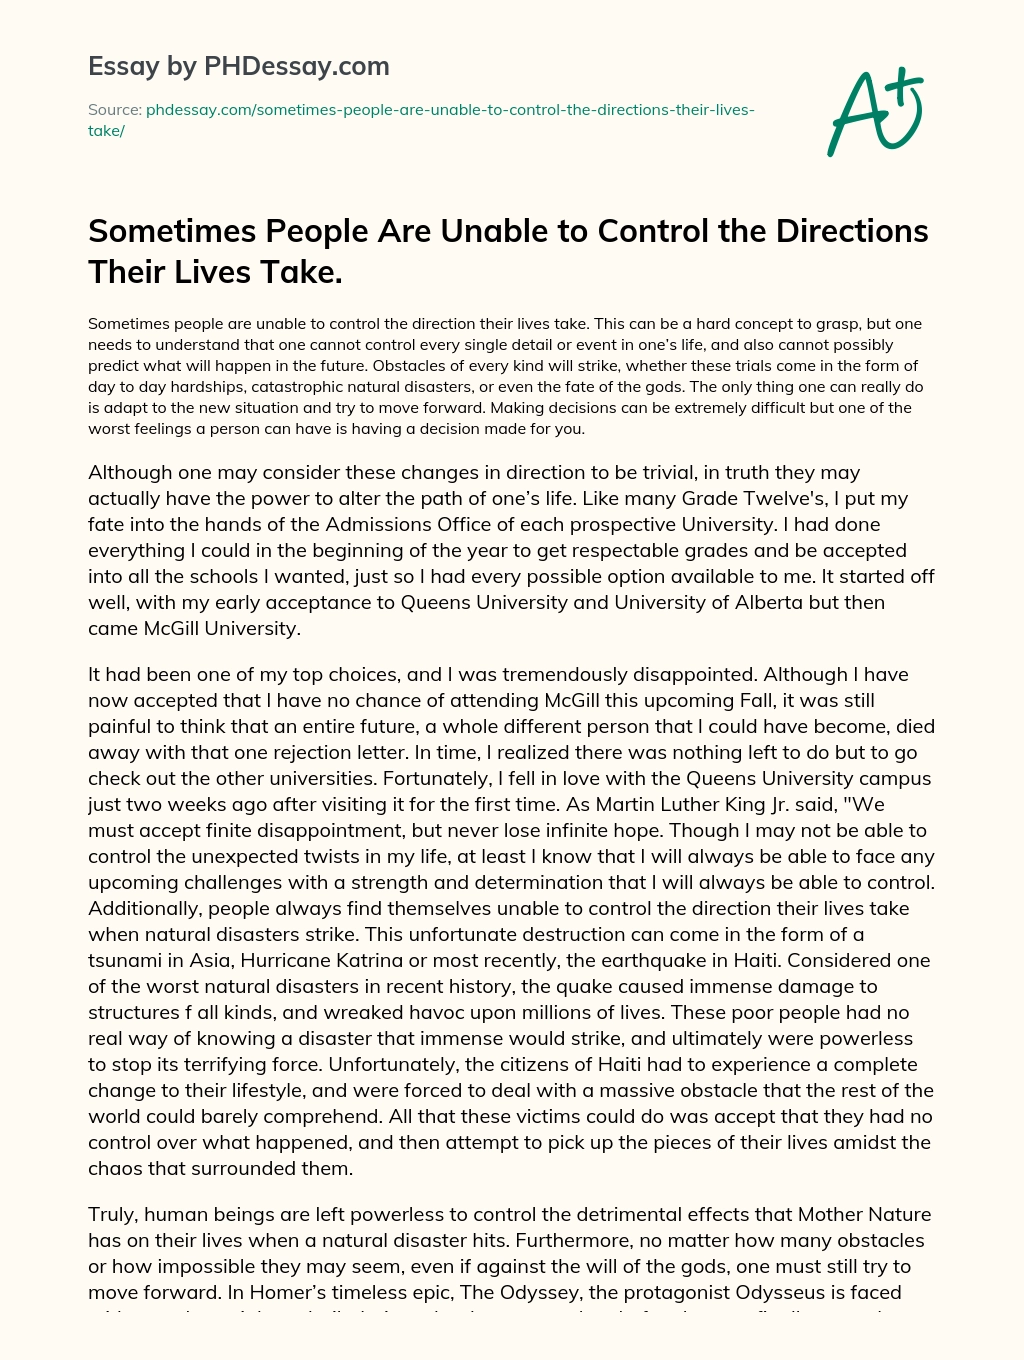 Sometimes People Are Unable to Control the Directions Their Lives Take. essay